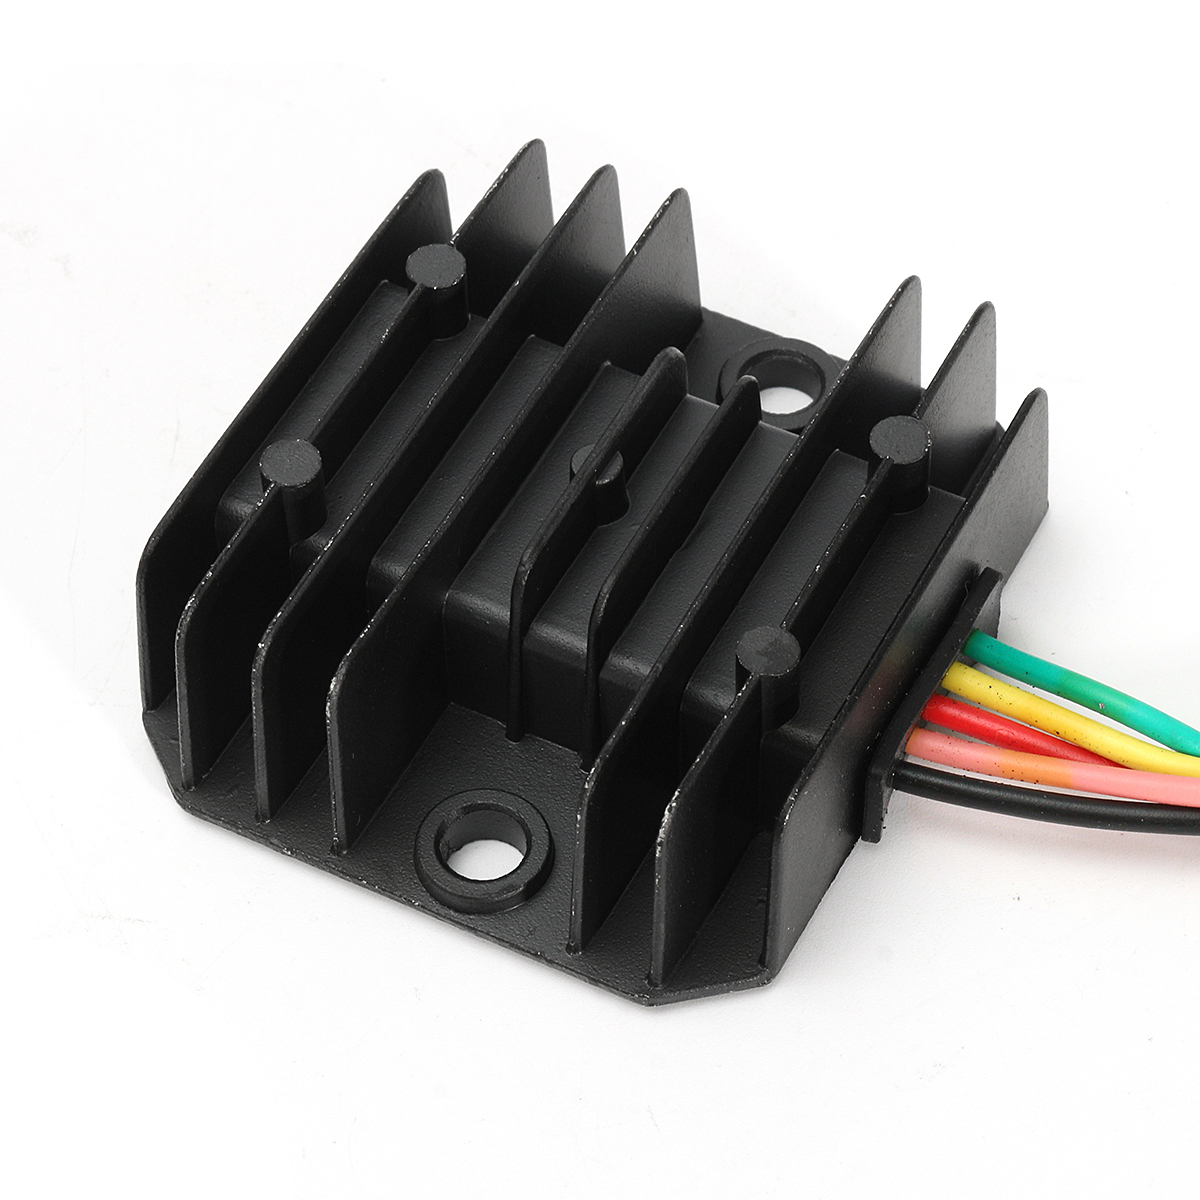 

12V 5 Wires Regulator Rectifier For 50cc 125cc Chinese ATV Quad Scooter Motorcycle